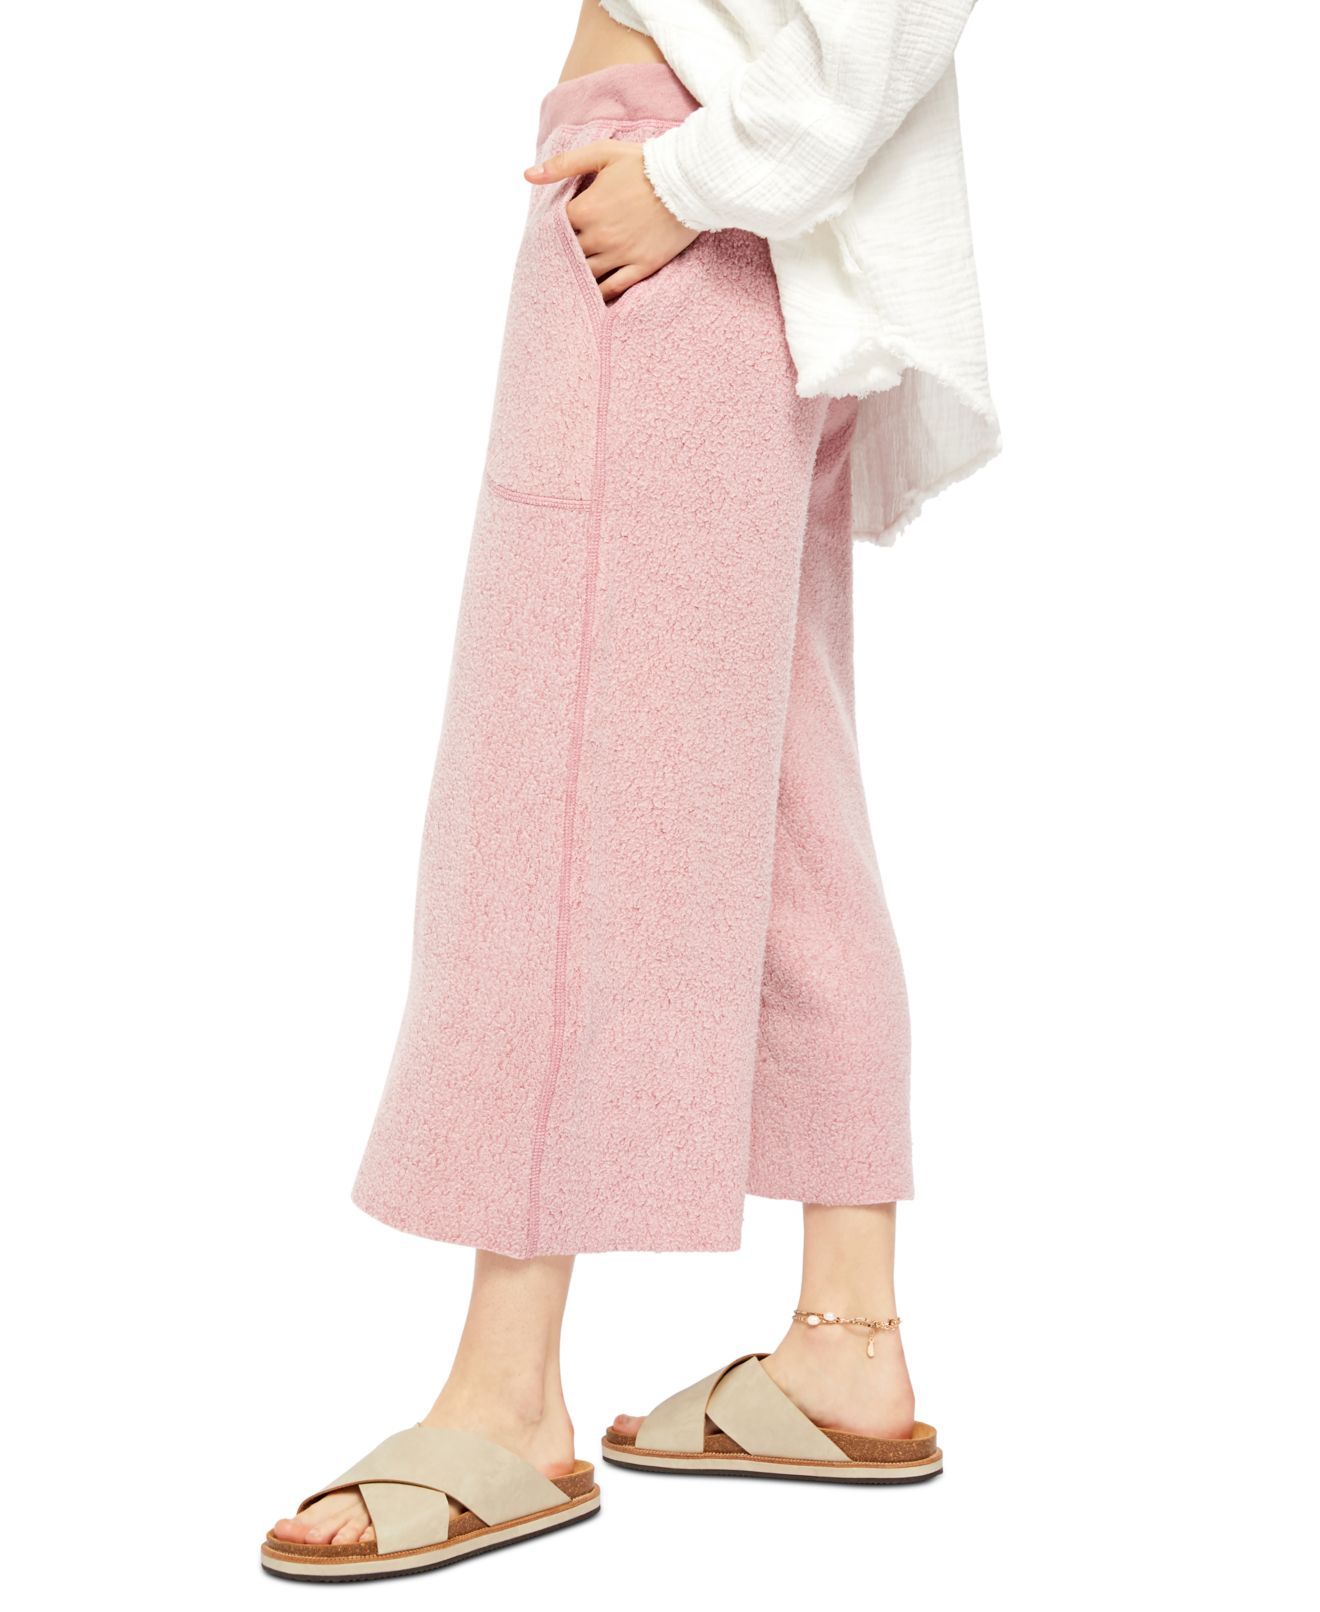 Color: Pinks Size Type: Regular Bottoms Size (Women's): M Height Type: regular Type: Pants Style: Sweatpants Occasion: Casual Rise: Mid Inseam: 22 Material: Polyester Stretch: YES